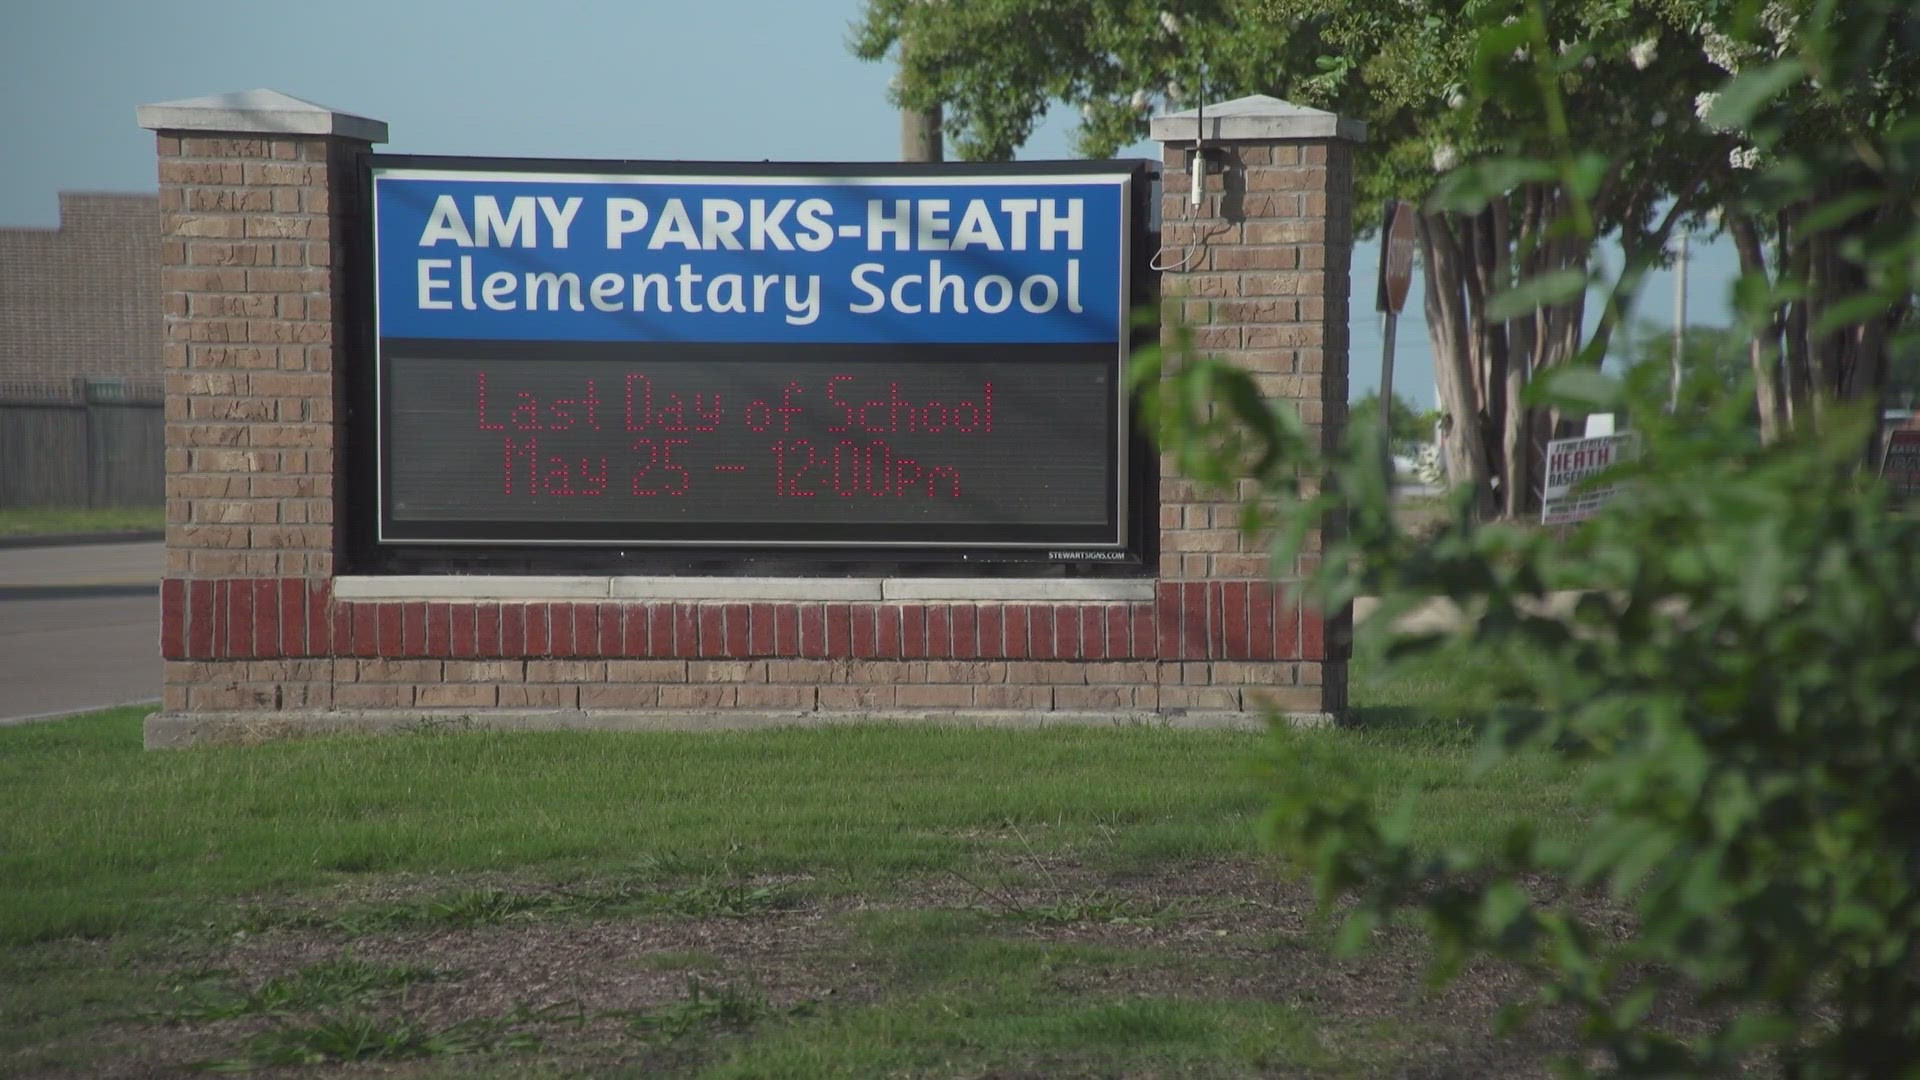 A sixth-grade boy allegedly sexually assaulted multiple girls in their kindergarten classrooms.